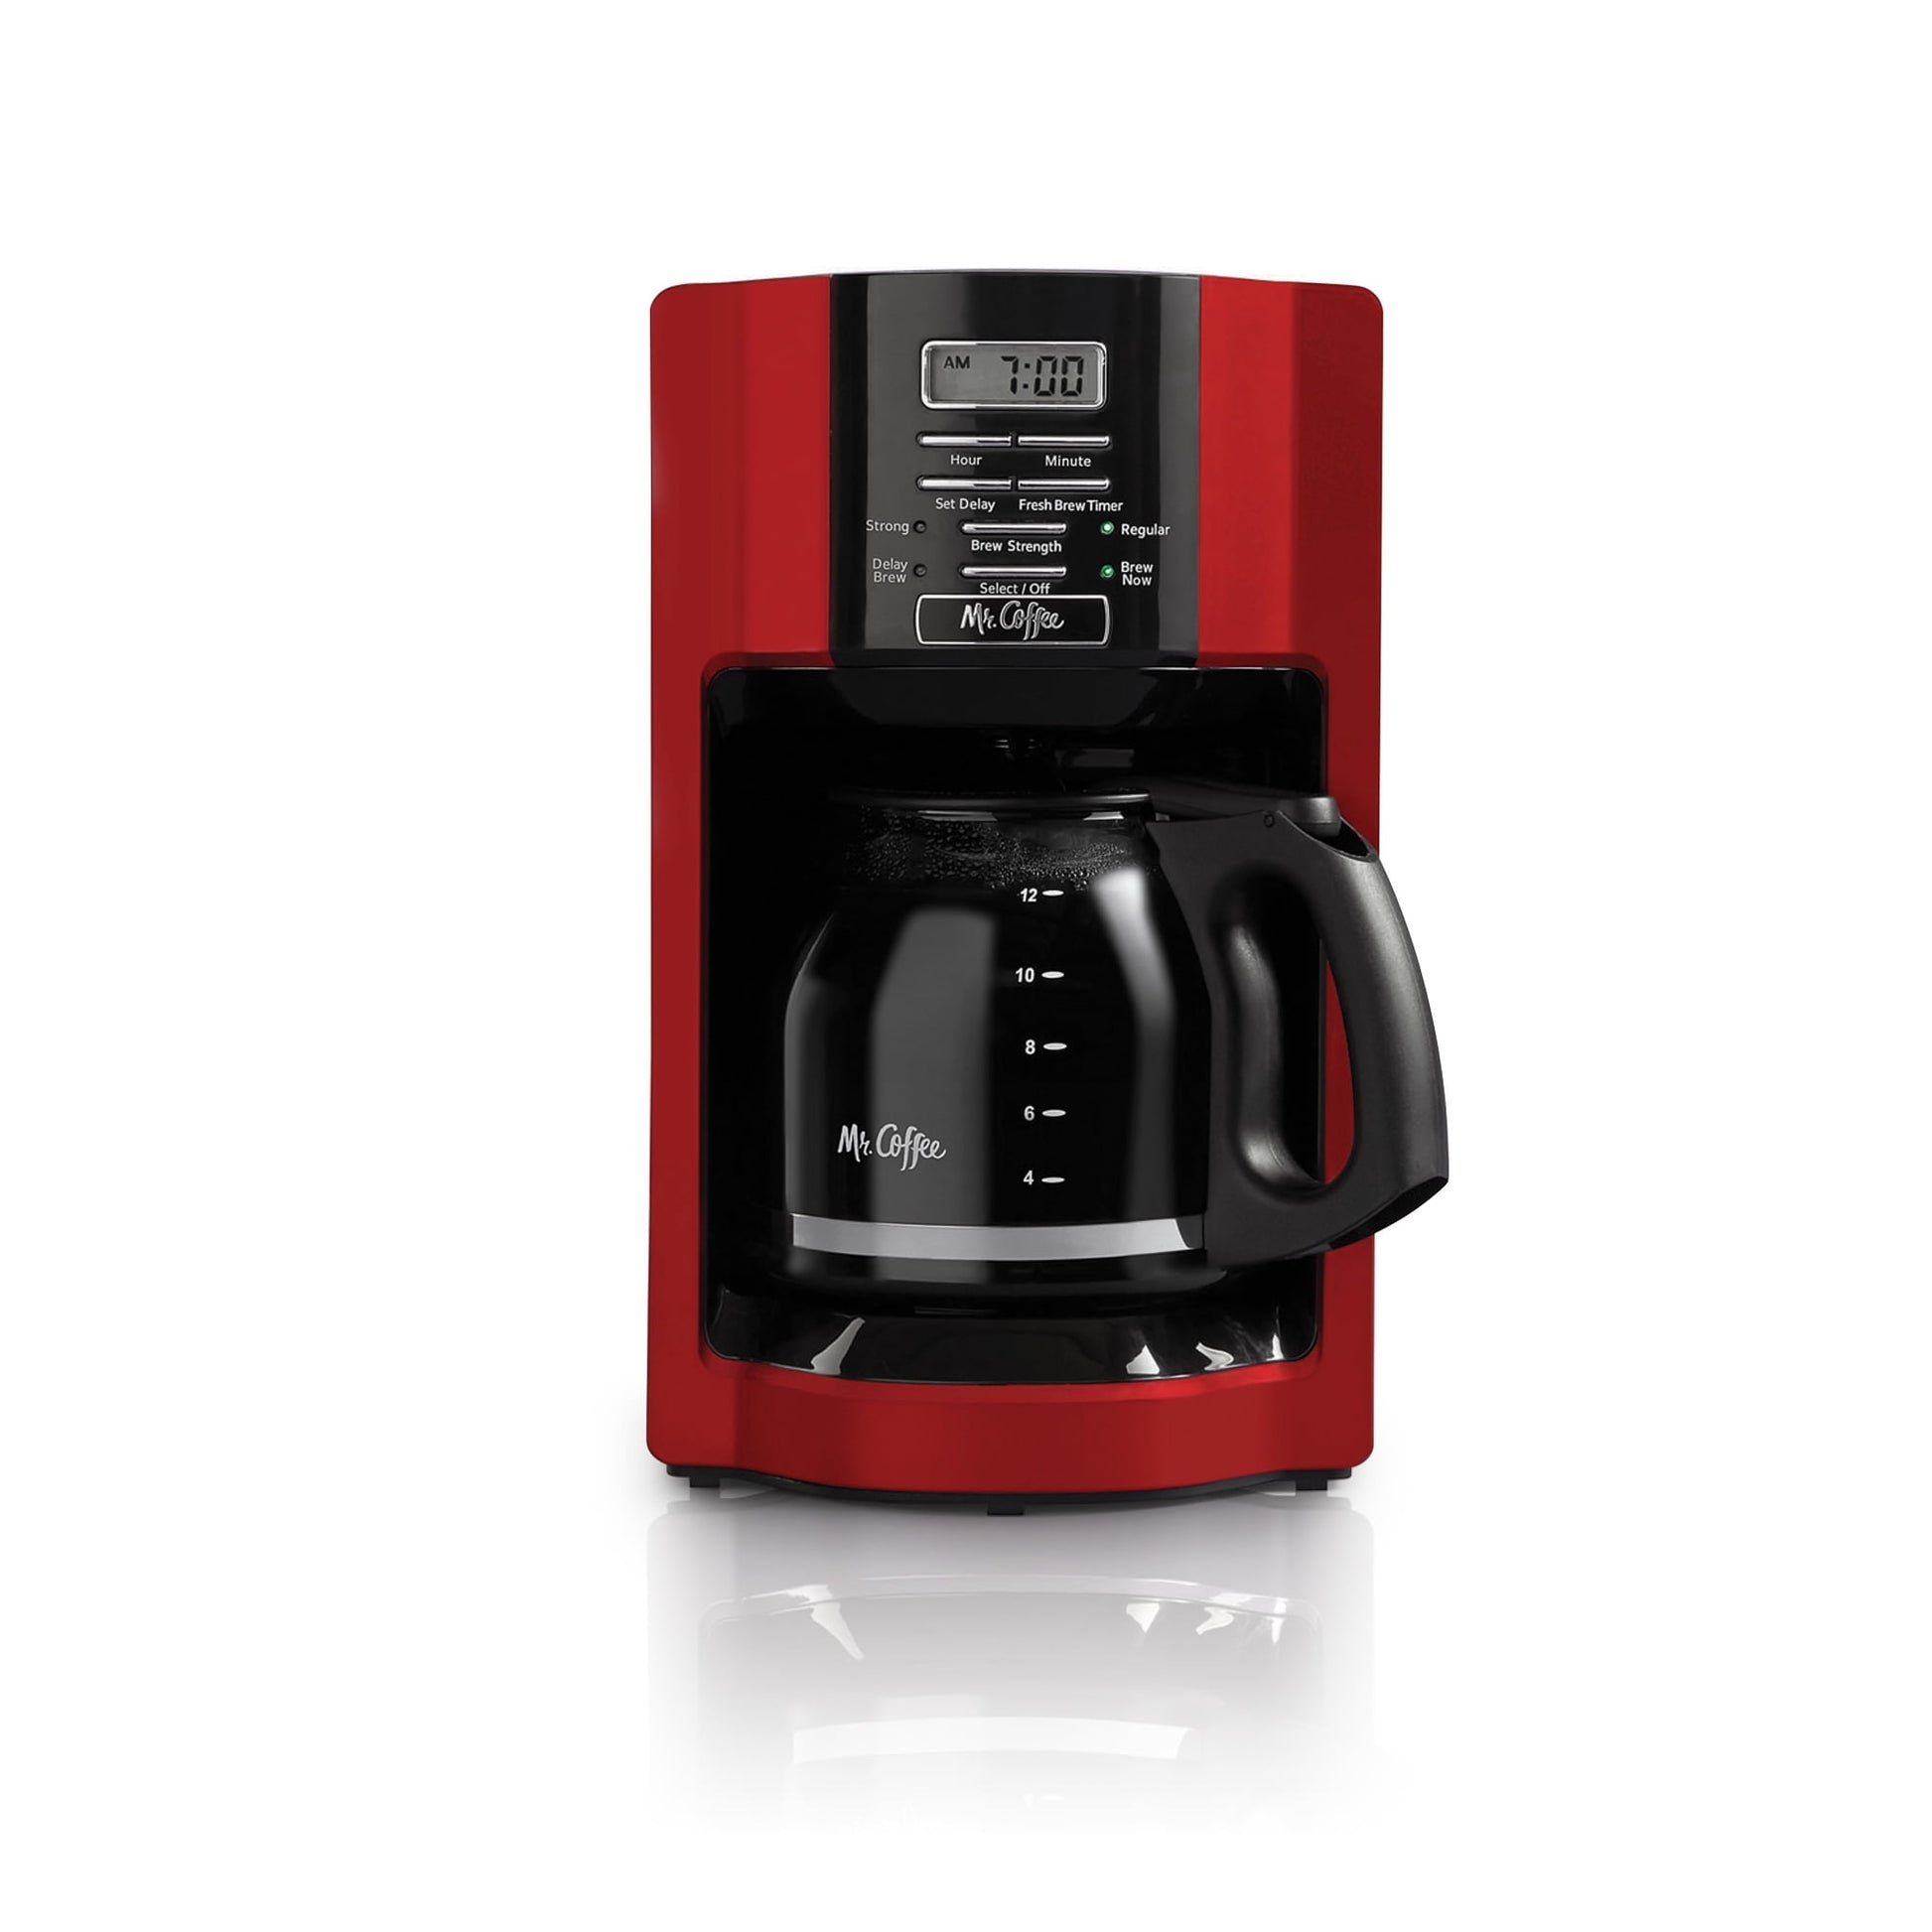 Mr. Coffee 10-Cup Programmable Coffee Maker, Stainless Steel 